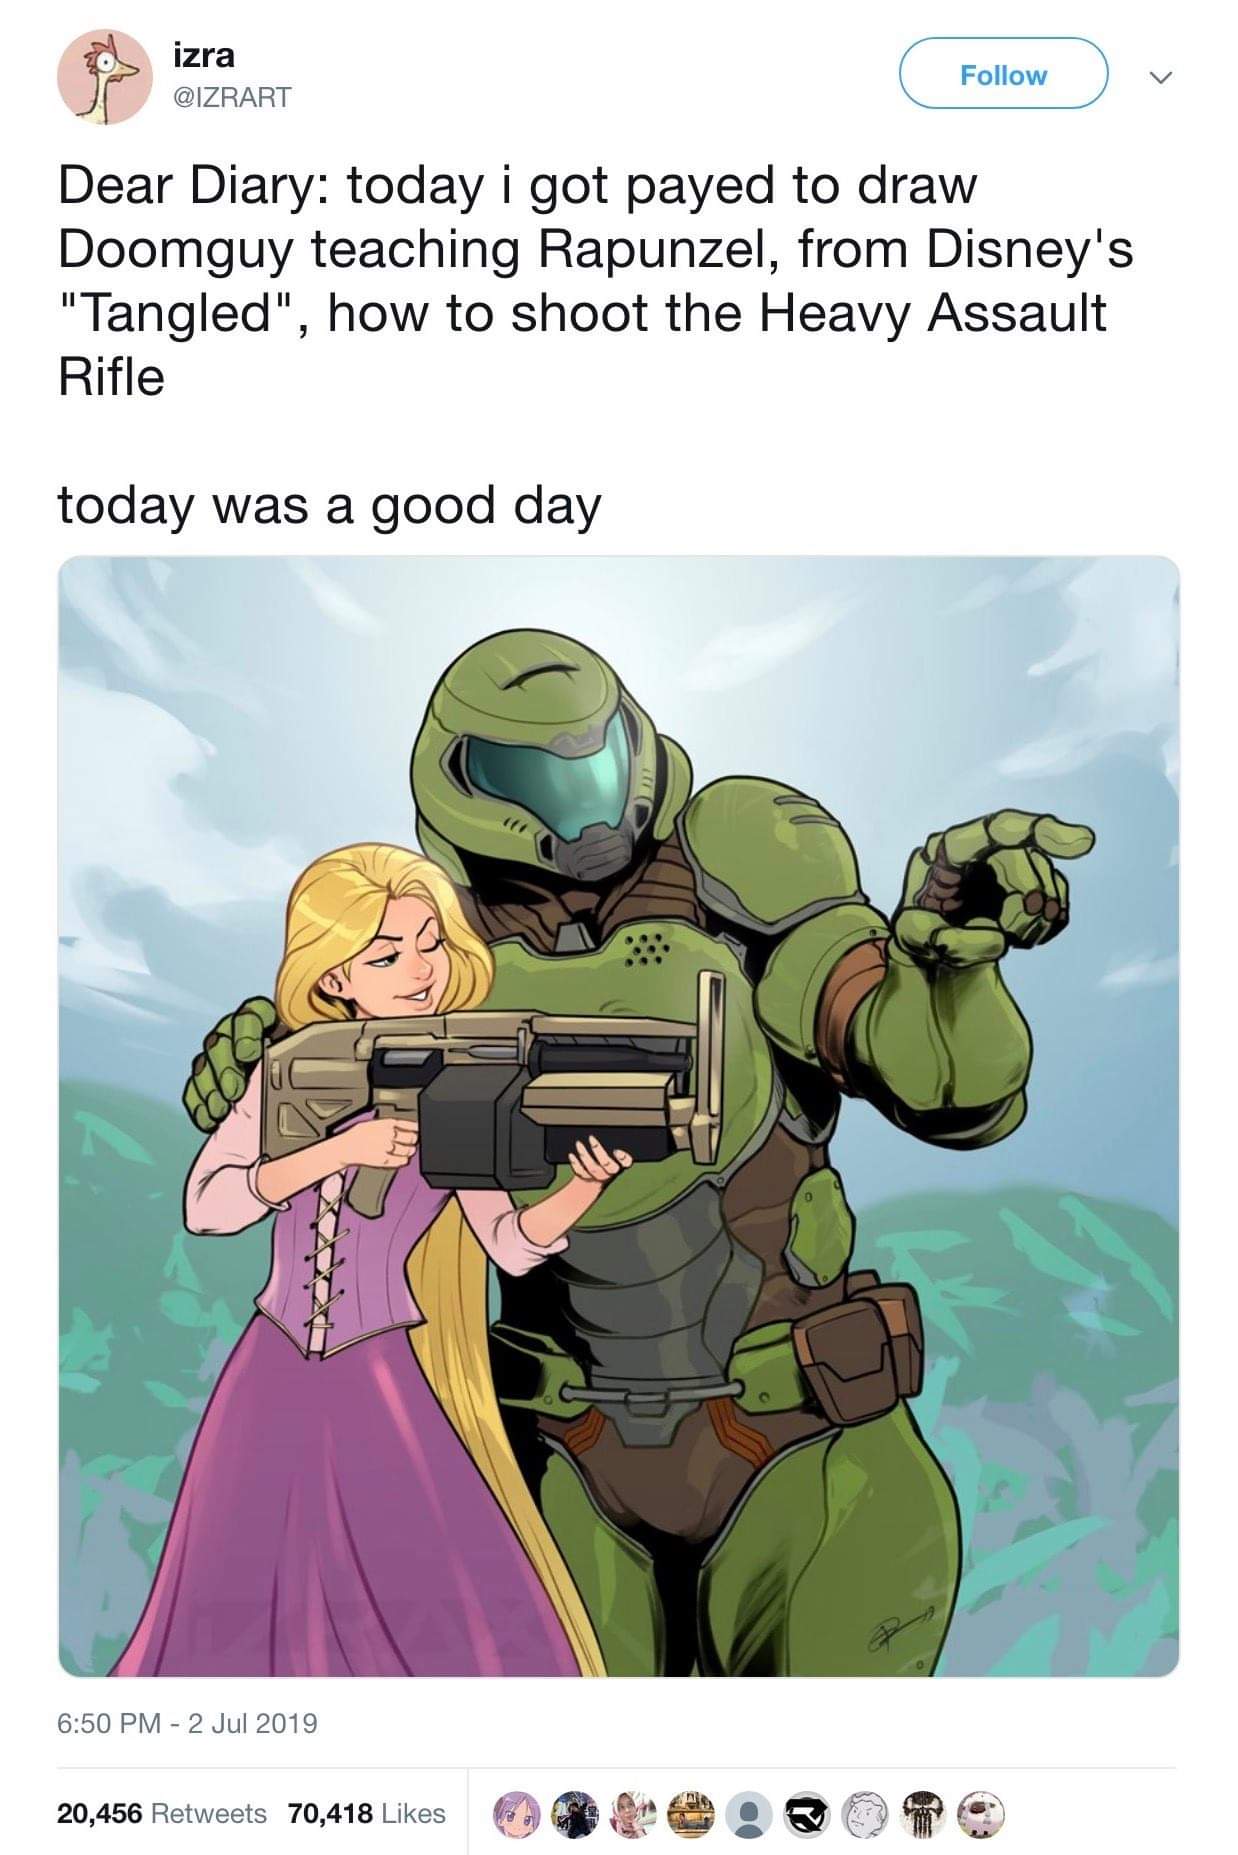 doomguy teaching rapunzel - izra Dear Diary today i got payed to draw Doomguy teaching Rapunzel, from Disney's "Tangled", how to shoot the Heavy Assault Rifle today was a good day 20,456 70,418